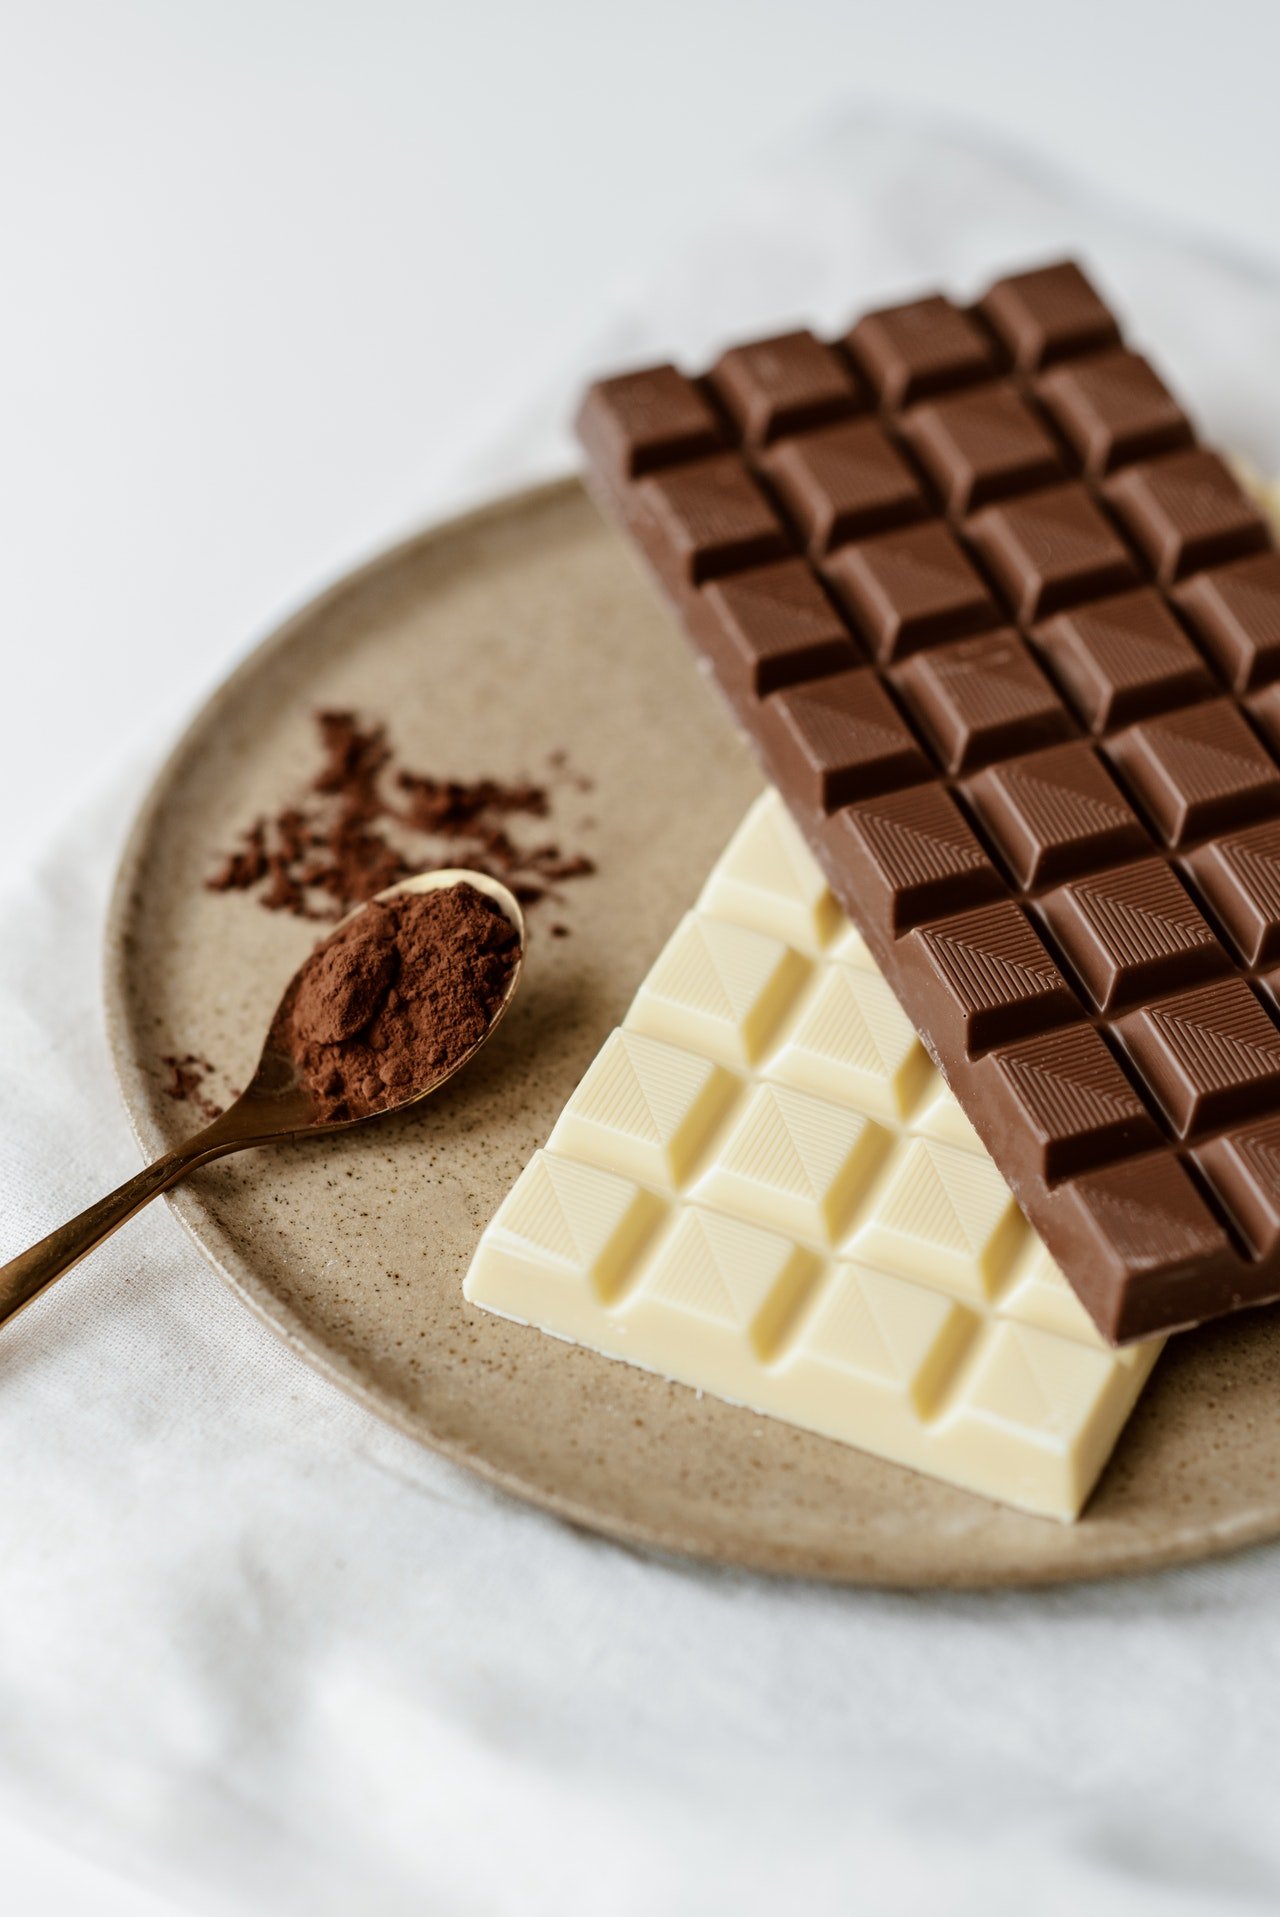 Photo of sweet chocolates on a plate | Photo: Pexels